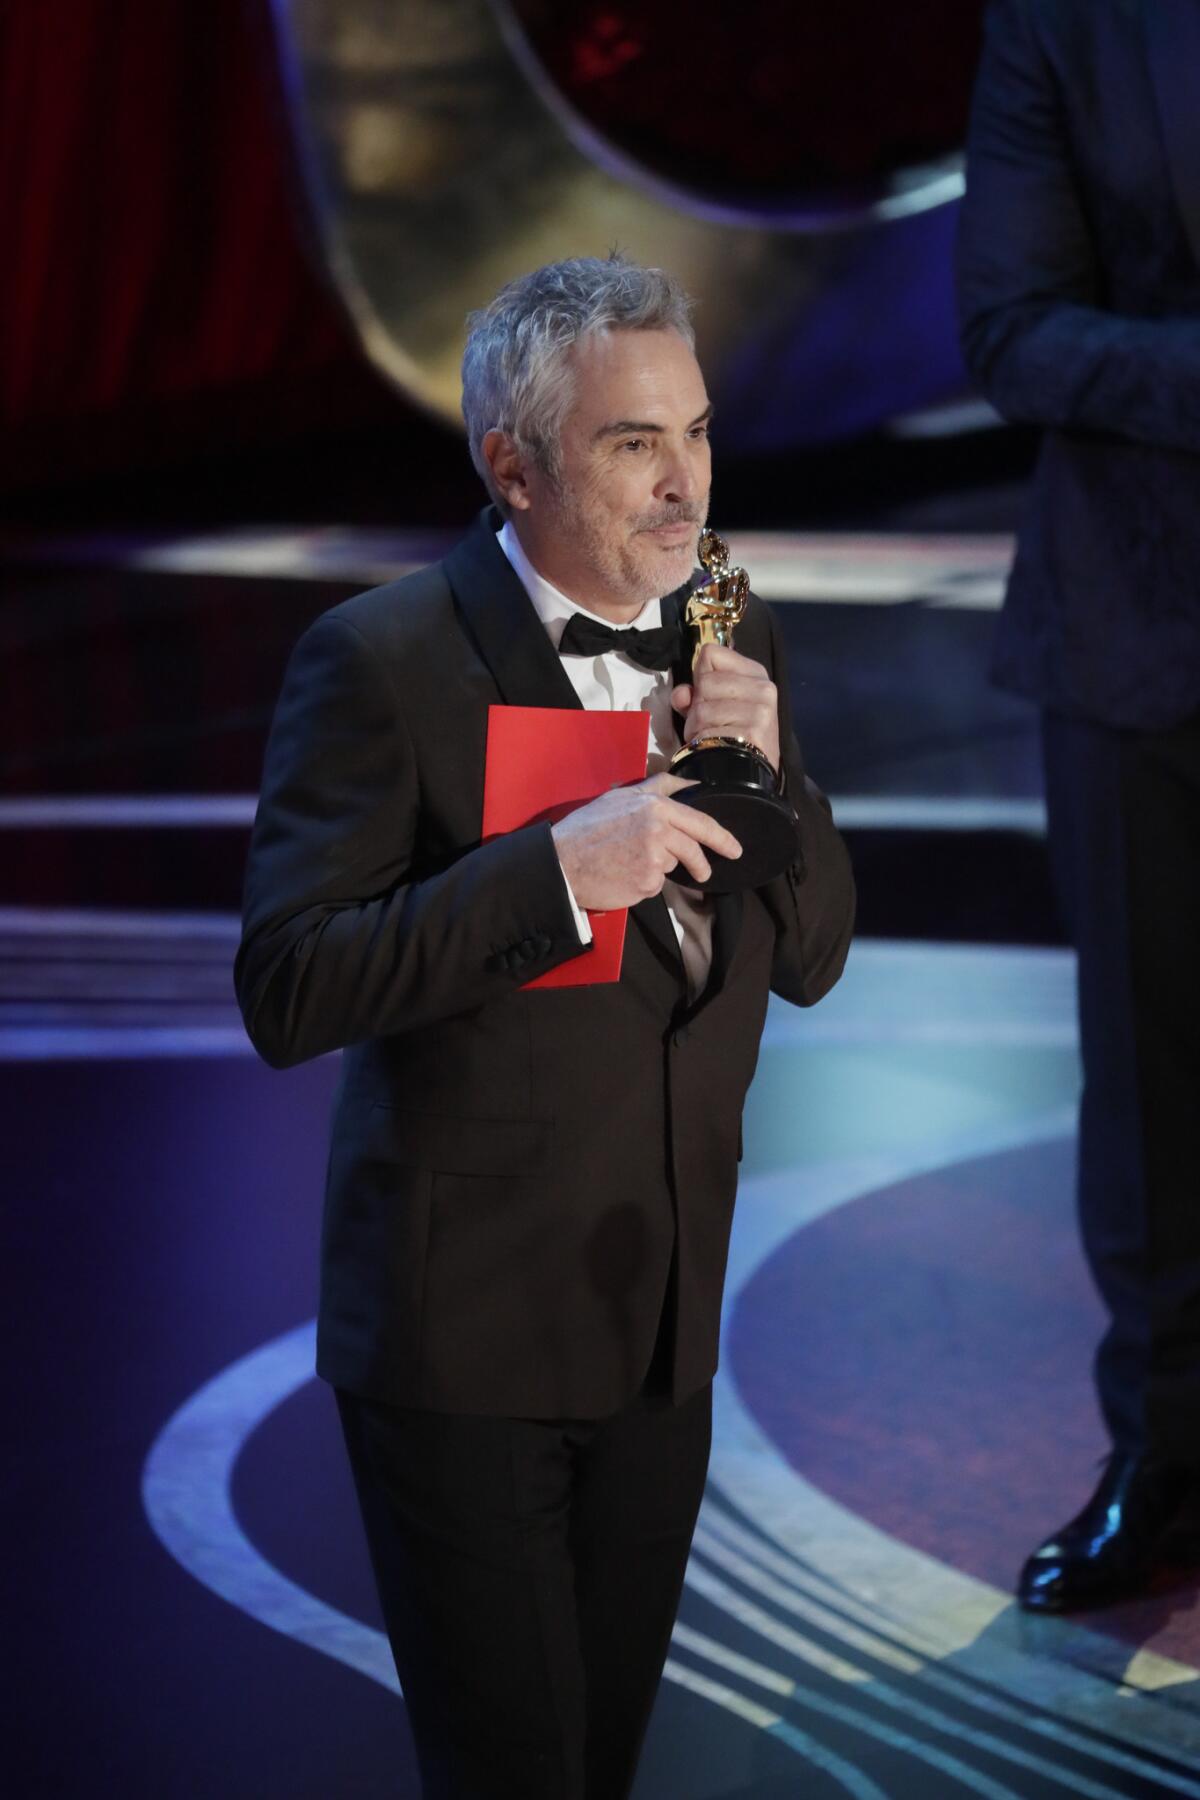 "Roma" writer-director Alfonso Cuarón accepts one of the film's three Oscar wins during the telecast of the 91st Academy Awards.